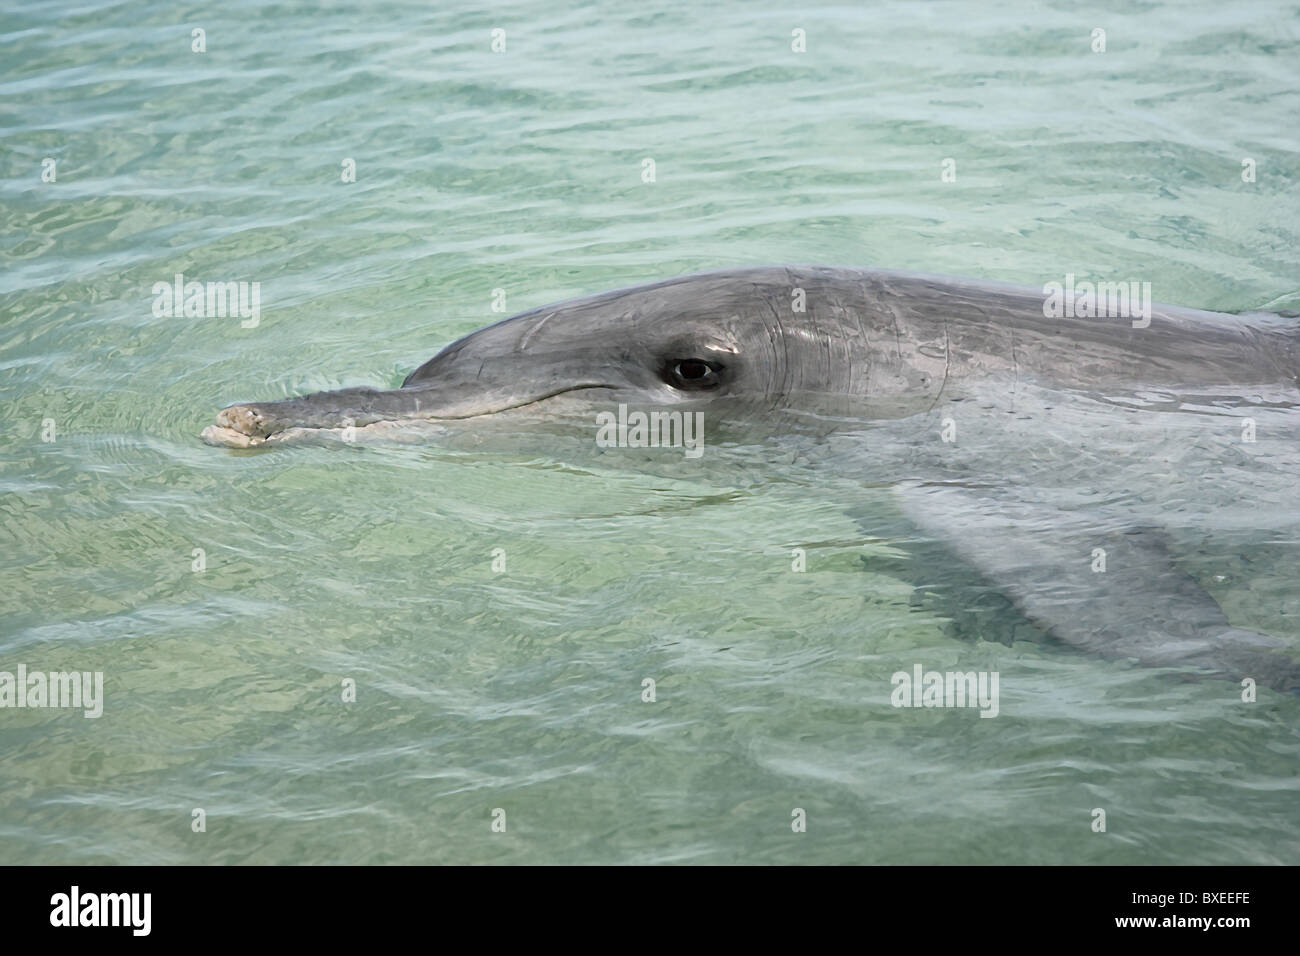 Bottlenose dolphin named Puck surfaces for a photograph at Monkey Mia Shark bay in Western Australia Stock Photo